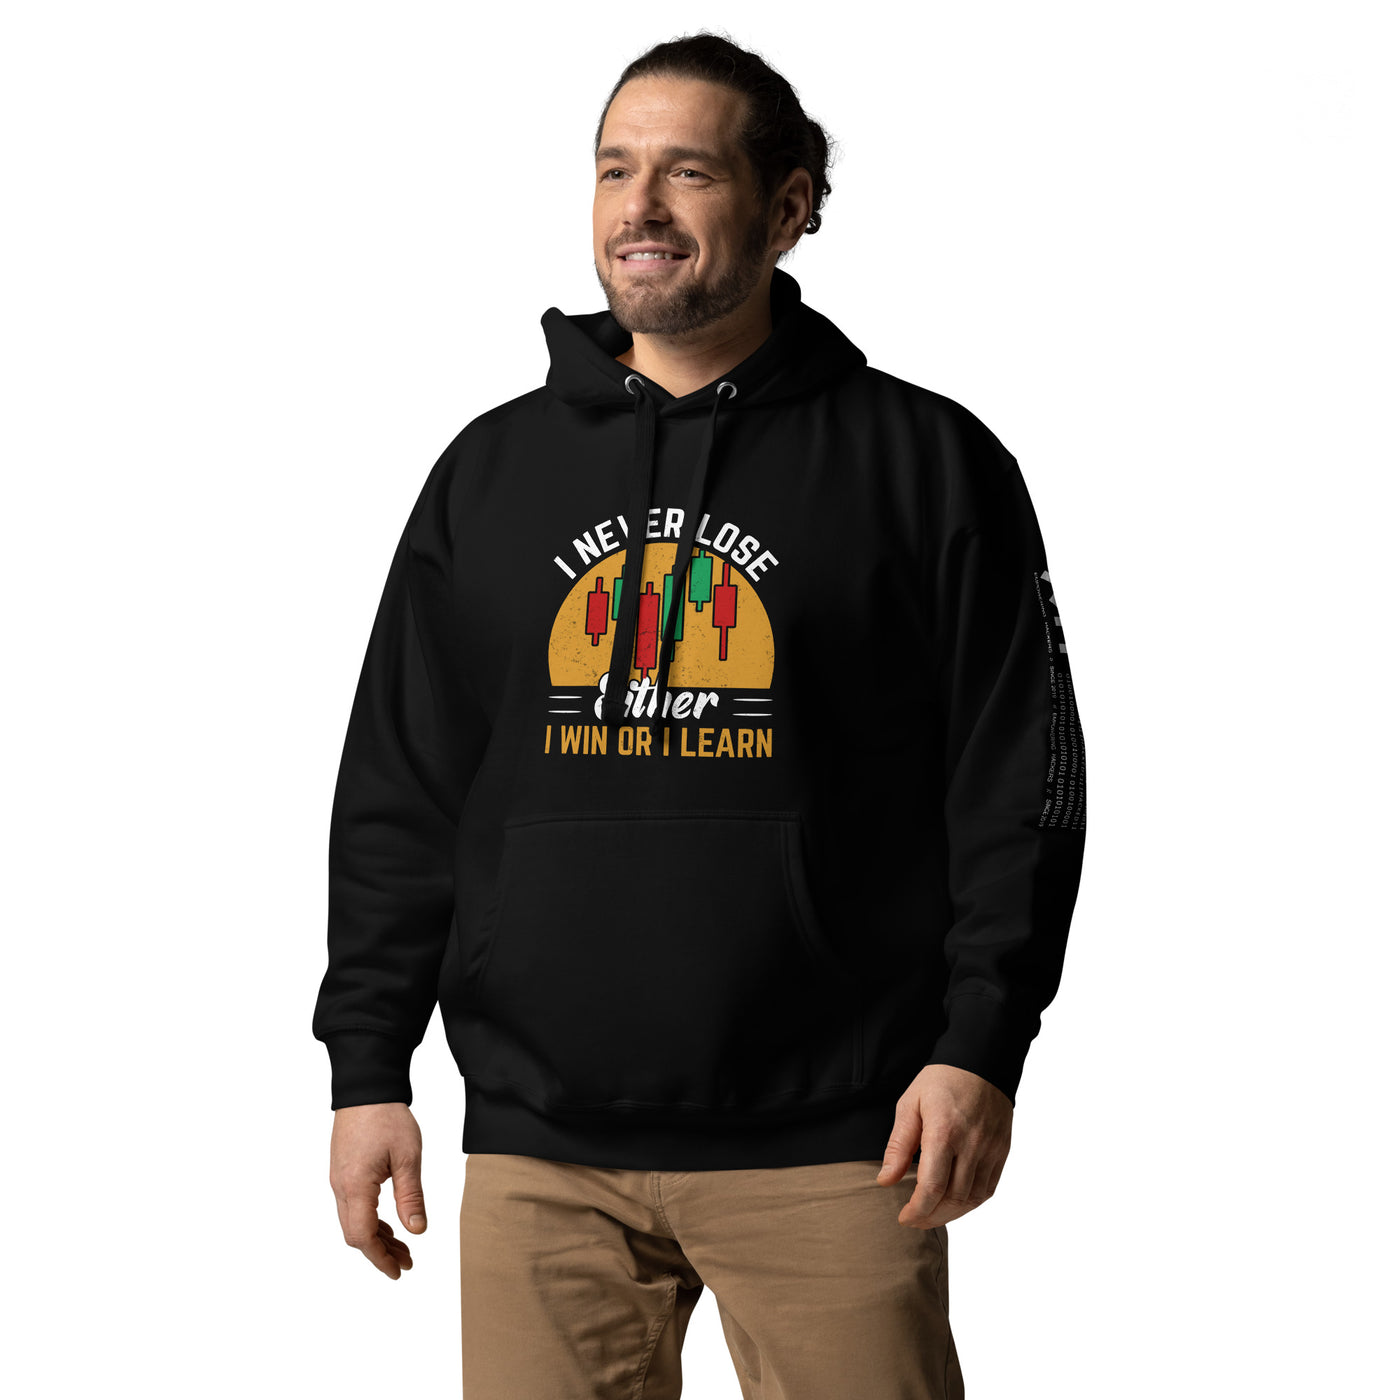 I never Lose: Either I win or I learn V1 - Unisex Hoodie